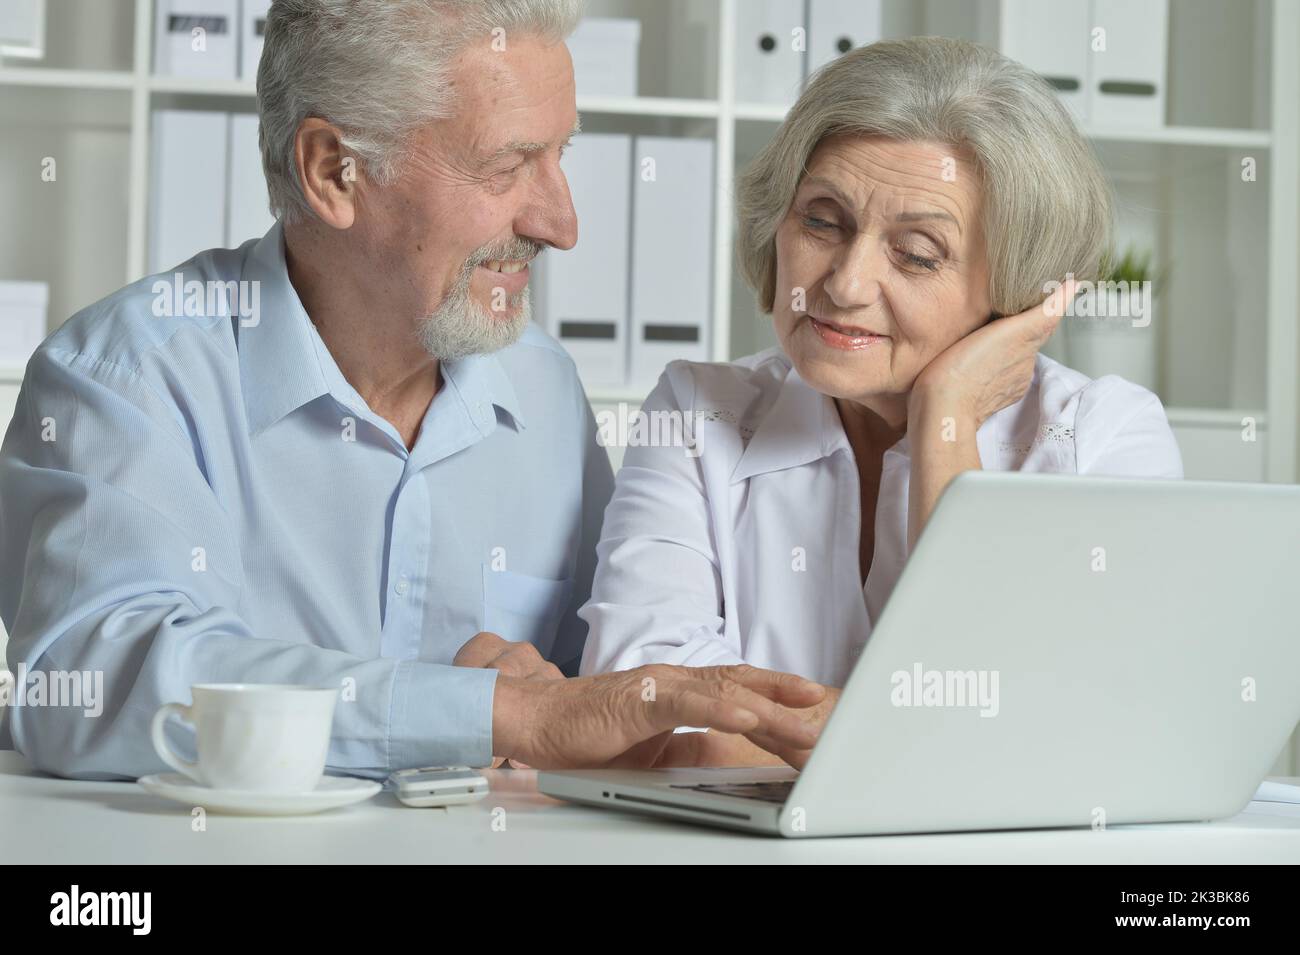 Portrait of an elderly couple of businessmen at a laptop in the office Stock Photo